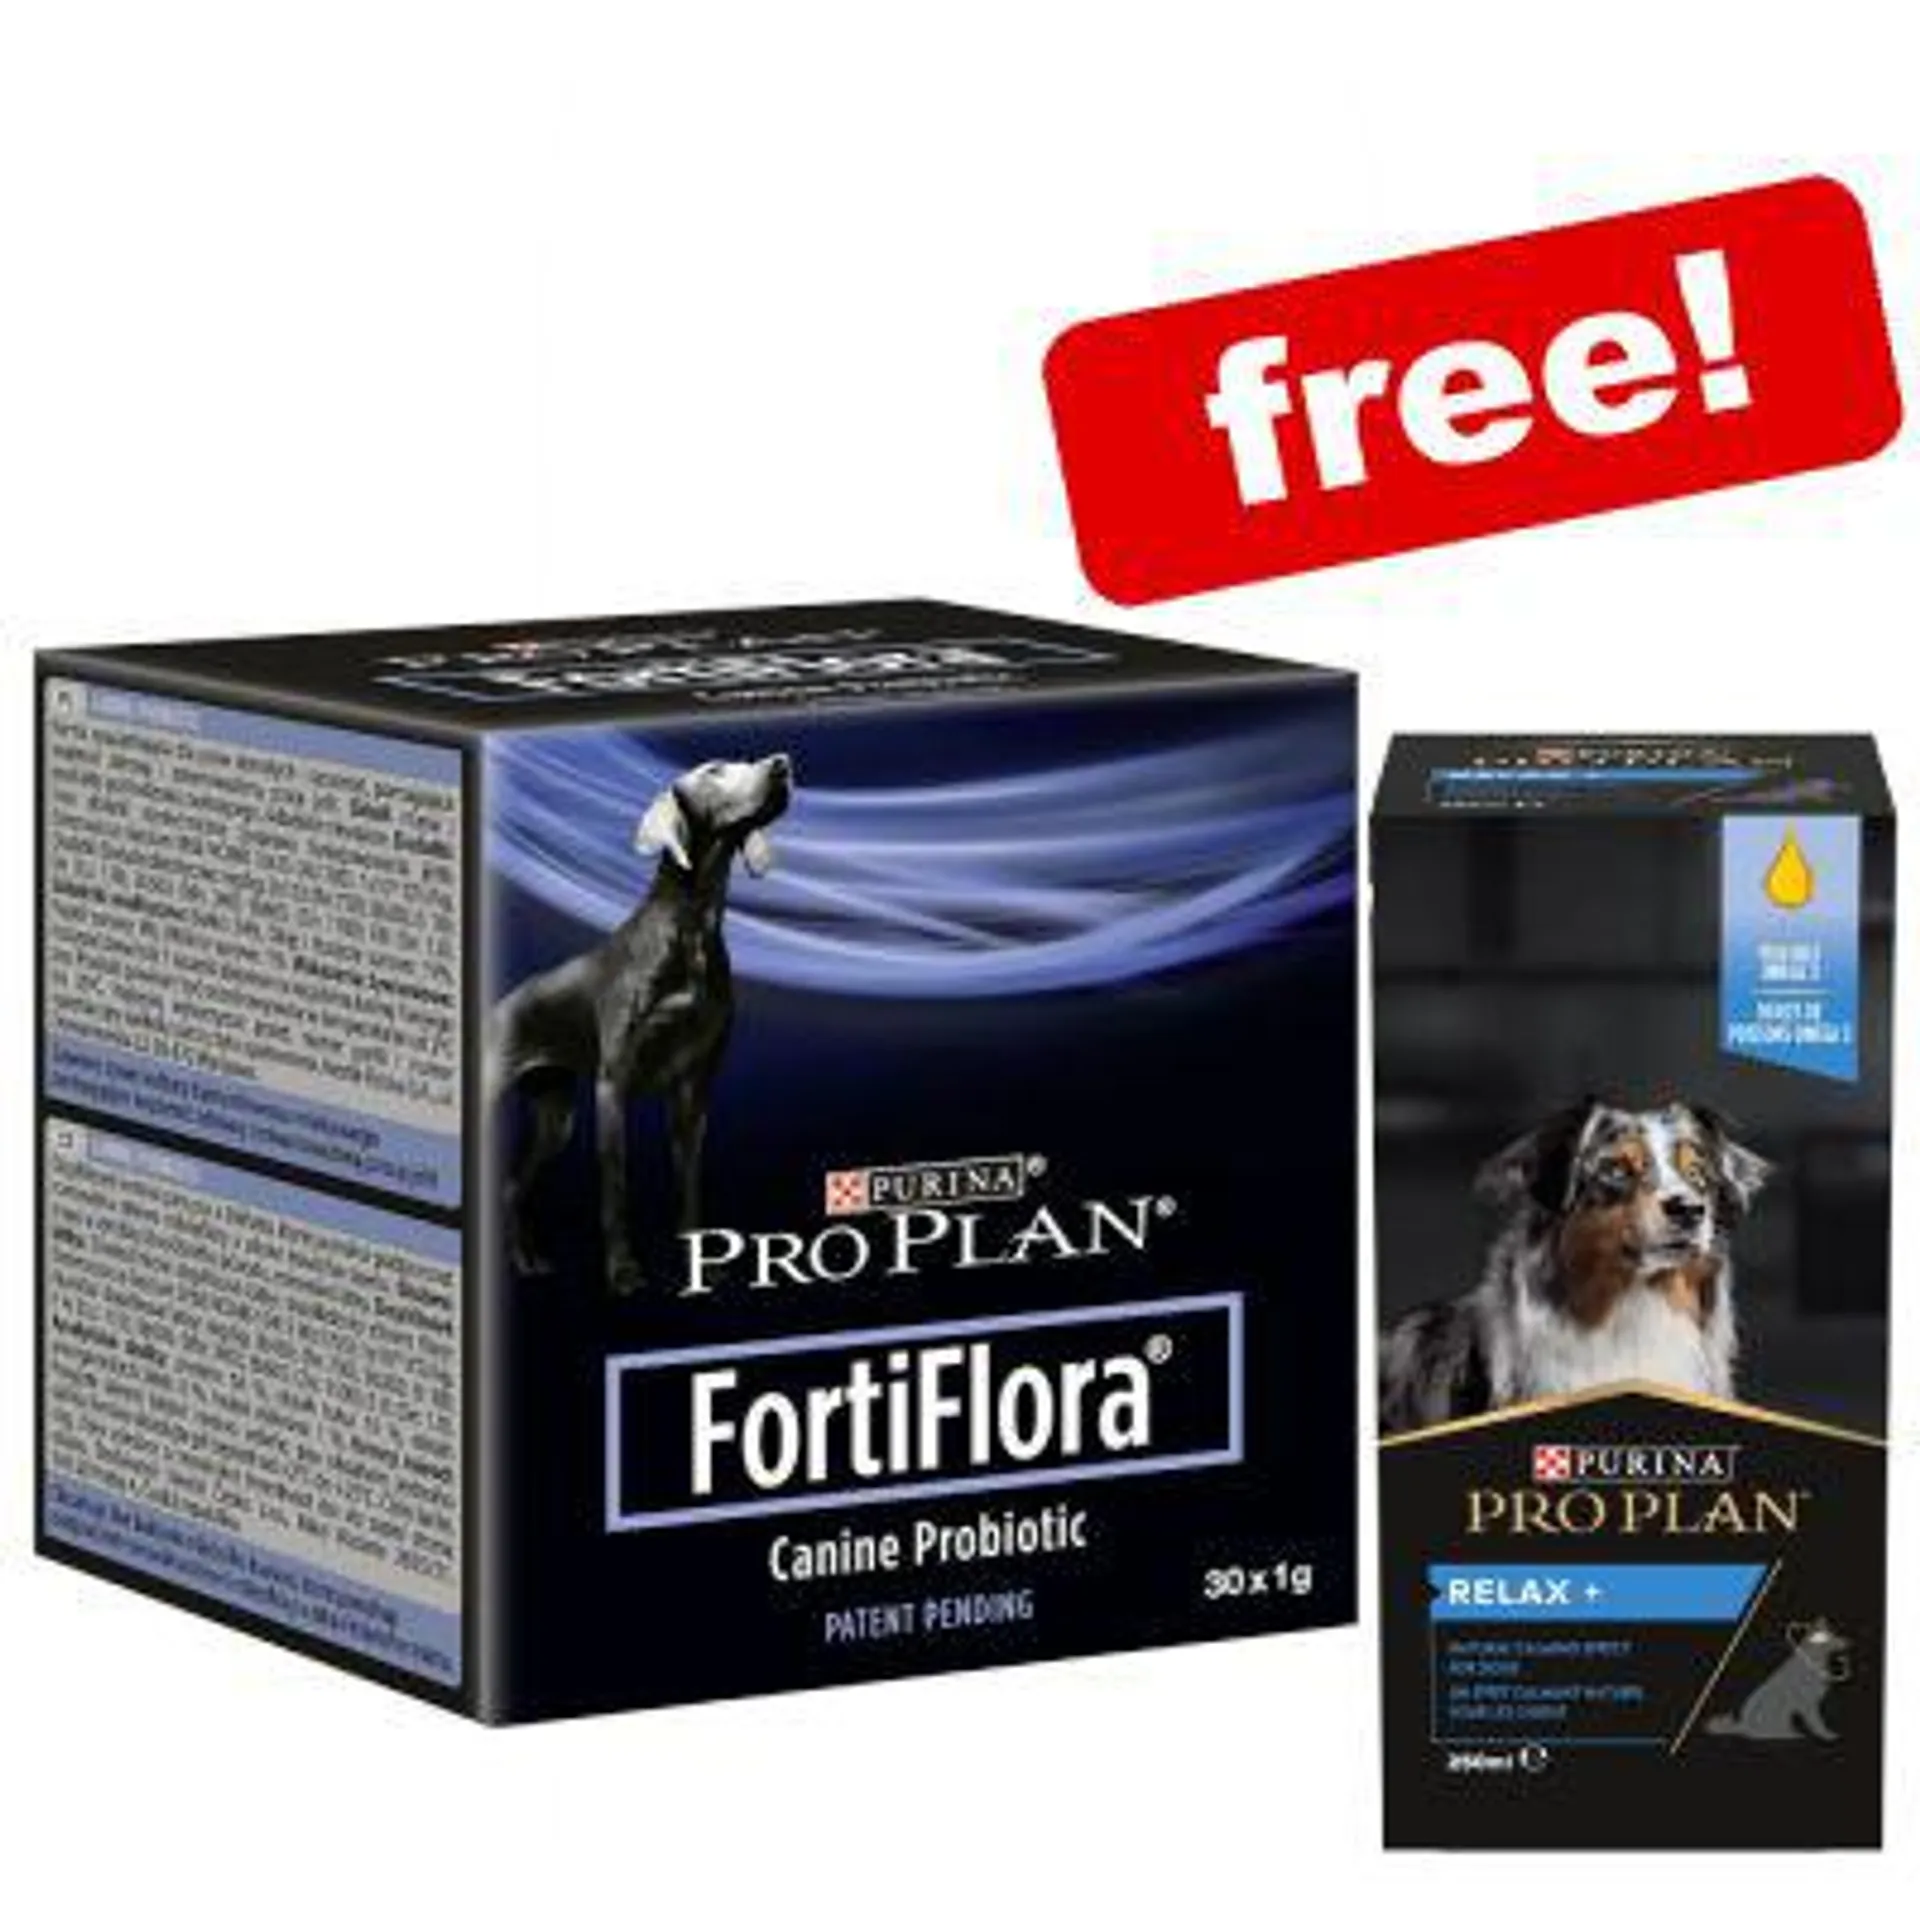 Pro Plan Fortiflora Canine Probiotic + 250ml Relax Supplement Oil Free!*